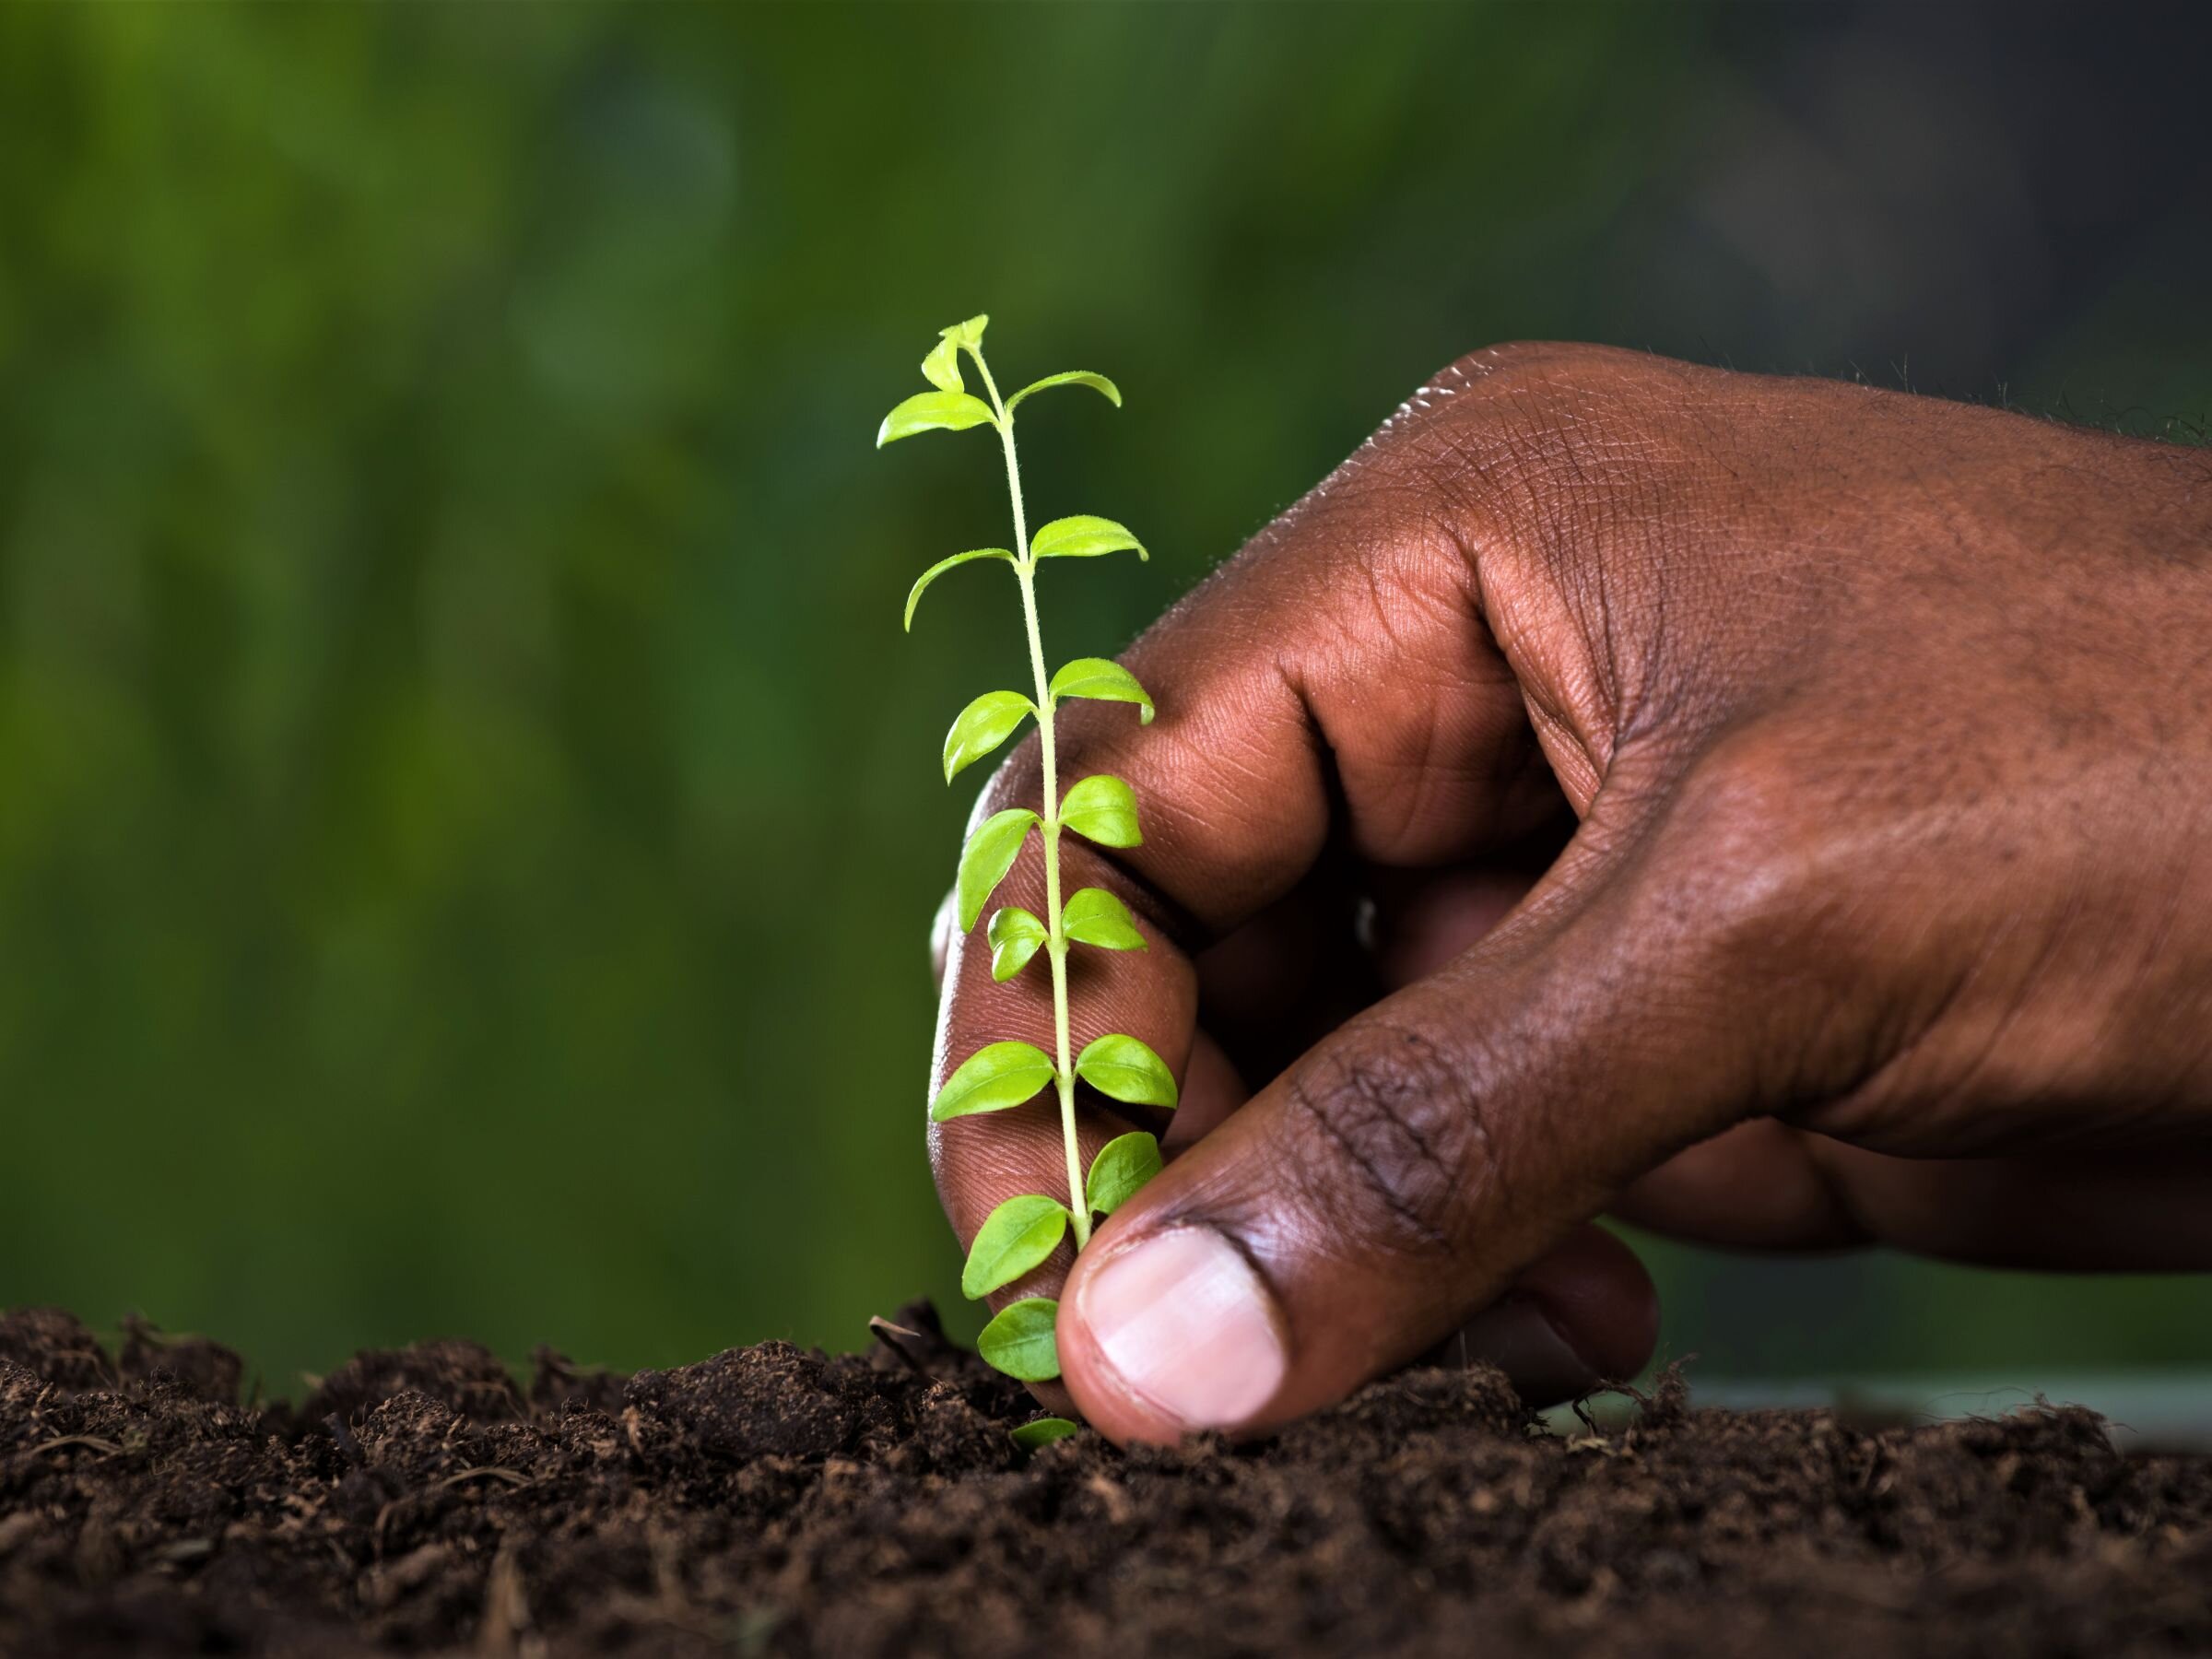 Give To Grow a Tree believe that tackling poverty & protecting the environment are inseparable